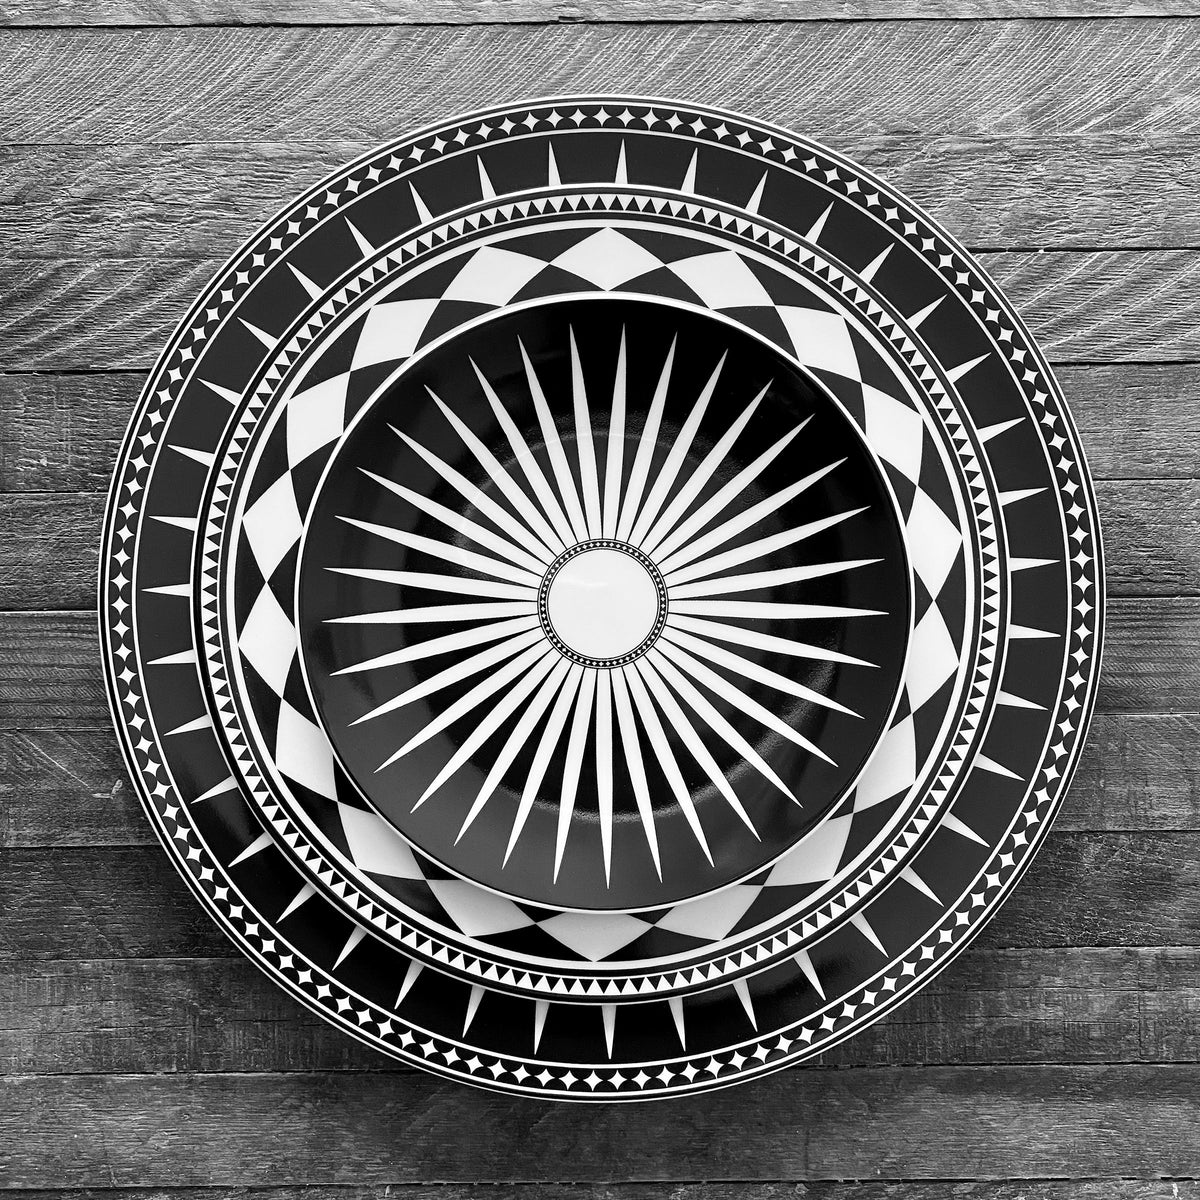 A black and white photo of a Marrakech Black Rimmed Dinner Plate with a geometric sunburst design, inspired by ceramics from Marrakech, created by Caskata Artisanal Home.